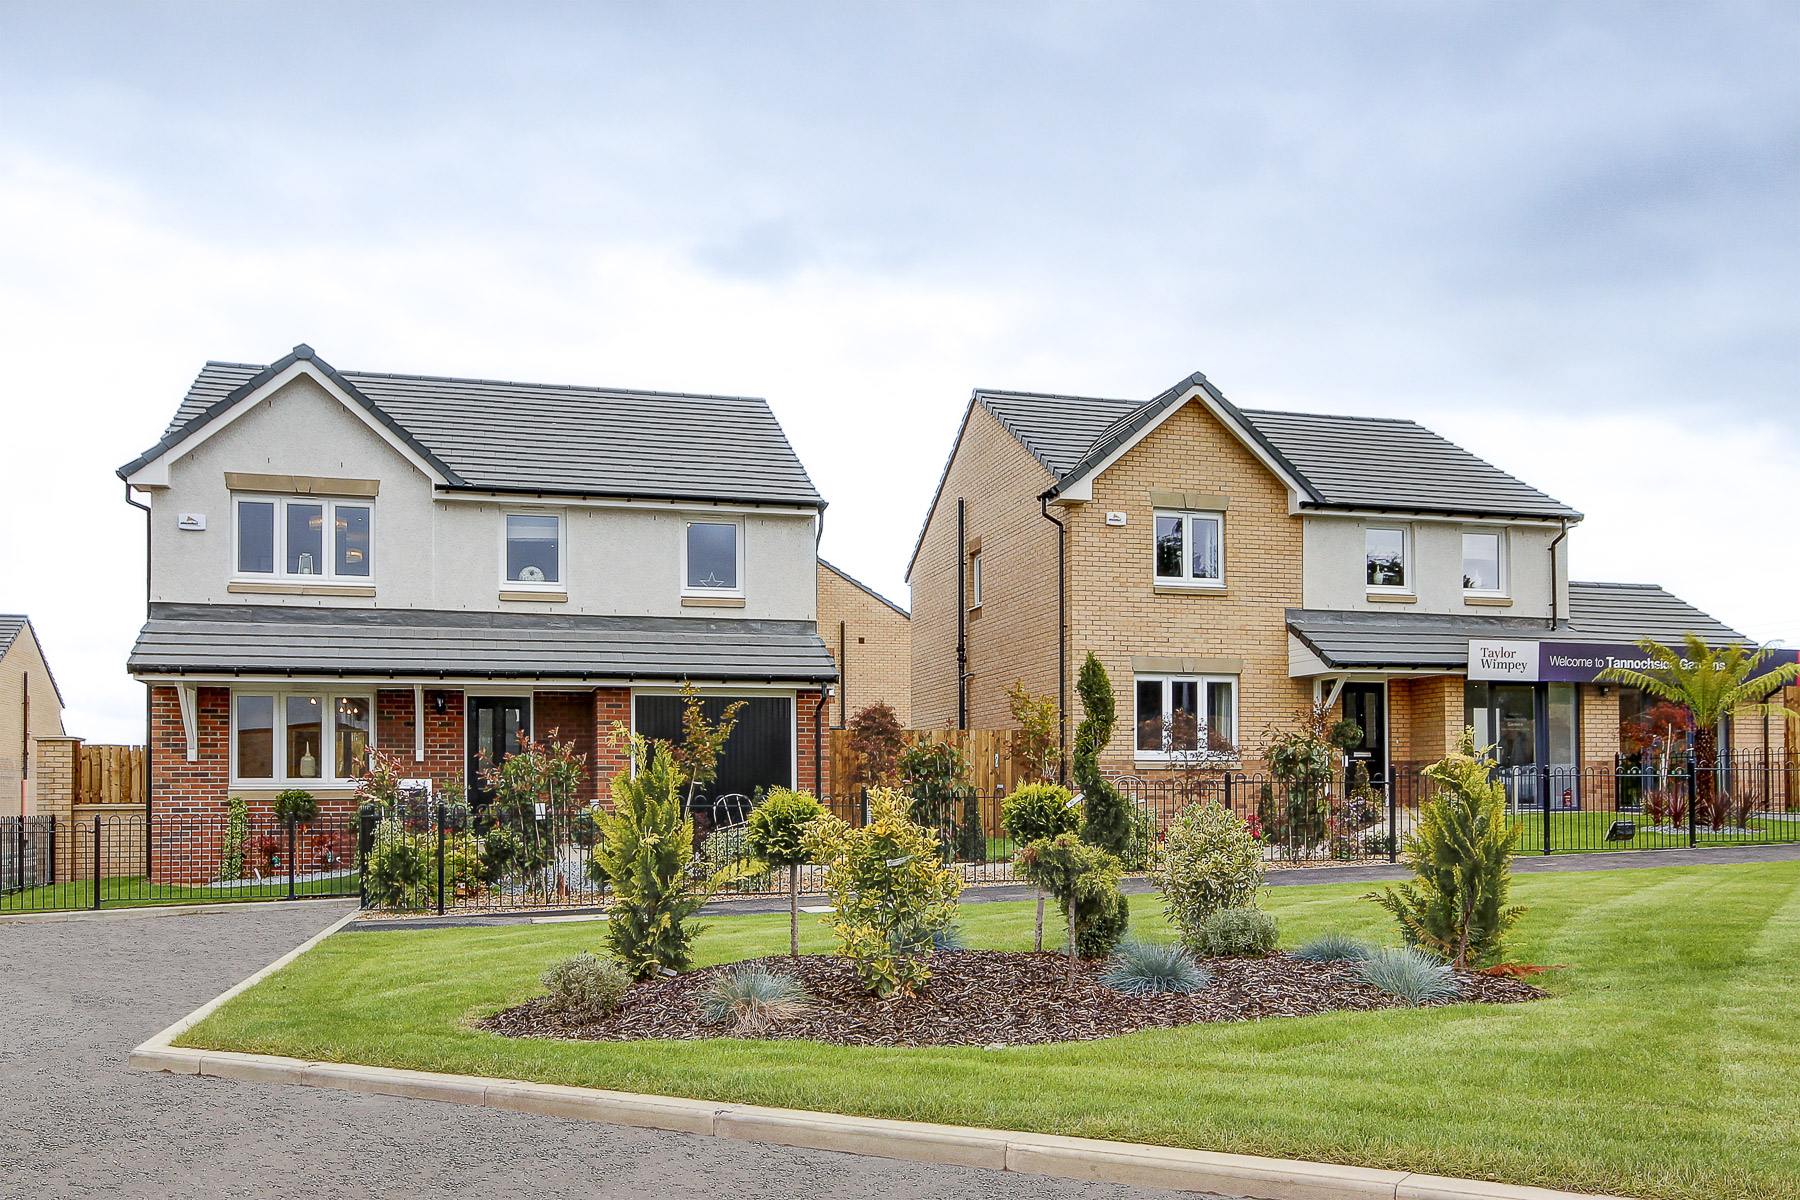 Land acquired at Taylor Wimpey’s first development in Barrhead